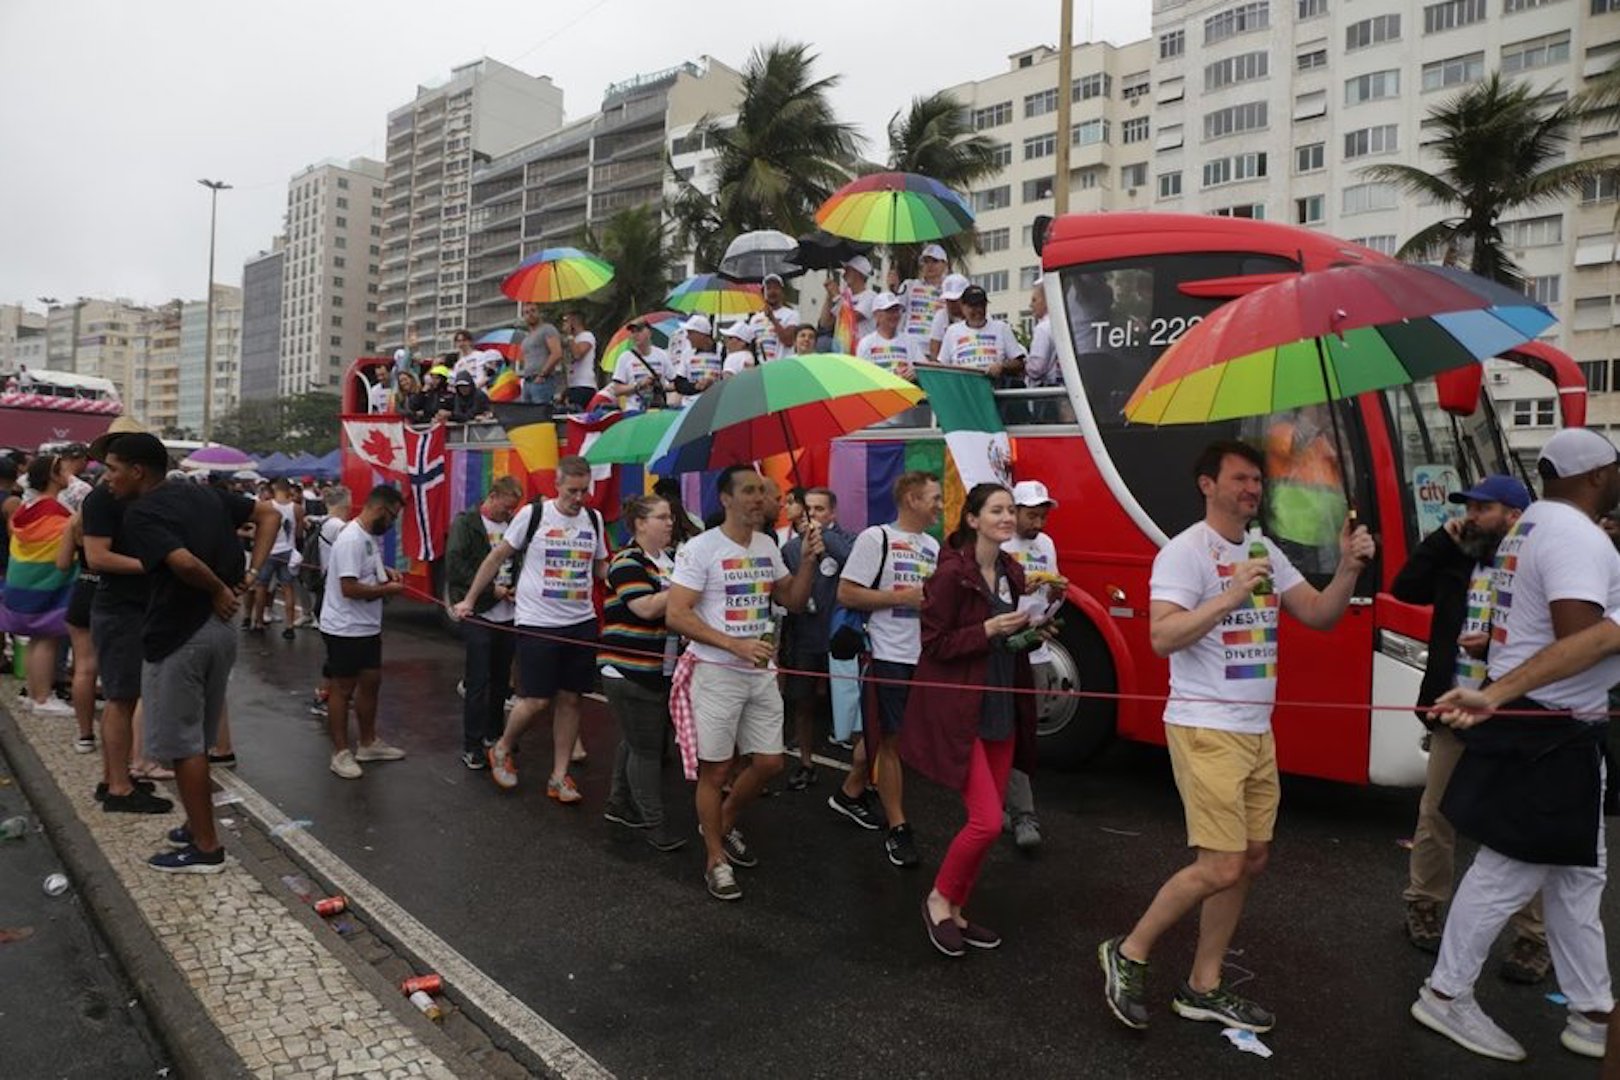 Brazil,Despite the drizzle which fell on parade goers throughout the day, more hundreds of thousands showed up for the LBGTi parade in Copacabana Beach in Rio.